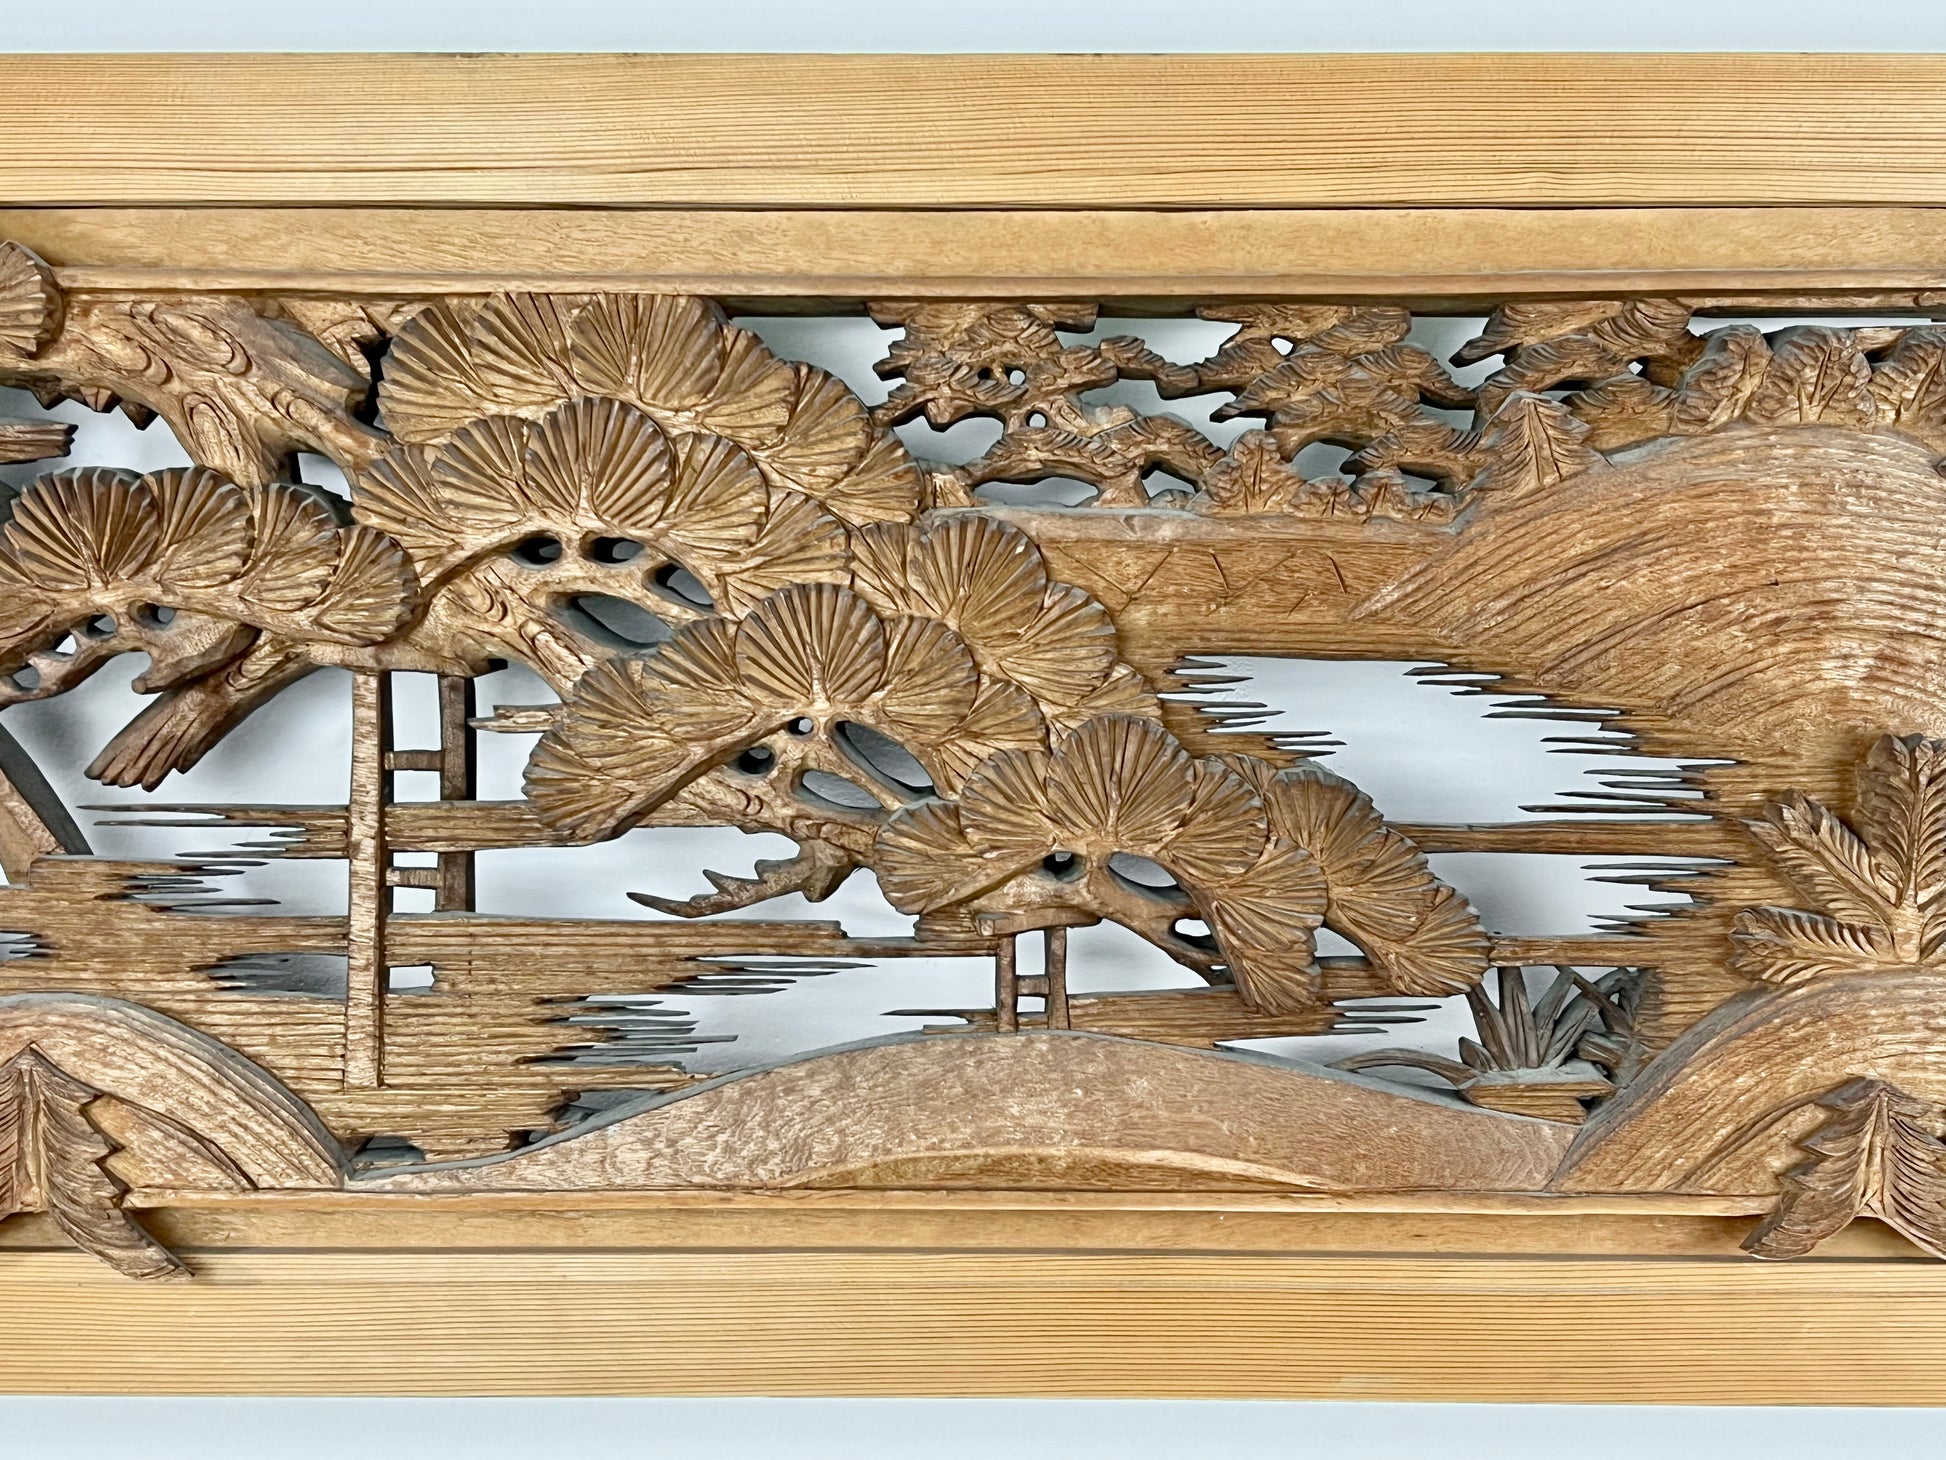 Buy Ranma Suzaku, Antique Japanese Wood Carving Panel, Authentic Japanese  Antiques and Collectibles for Sale, 23010130